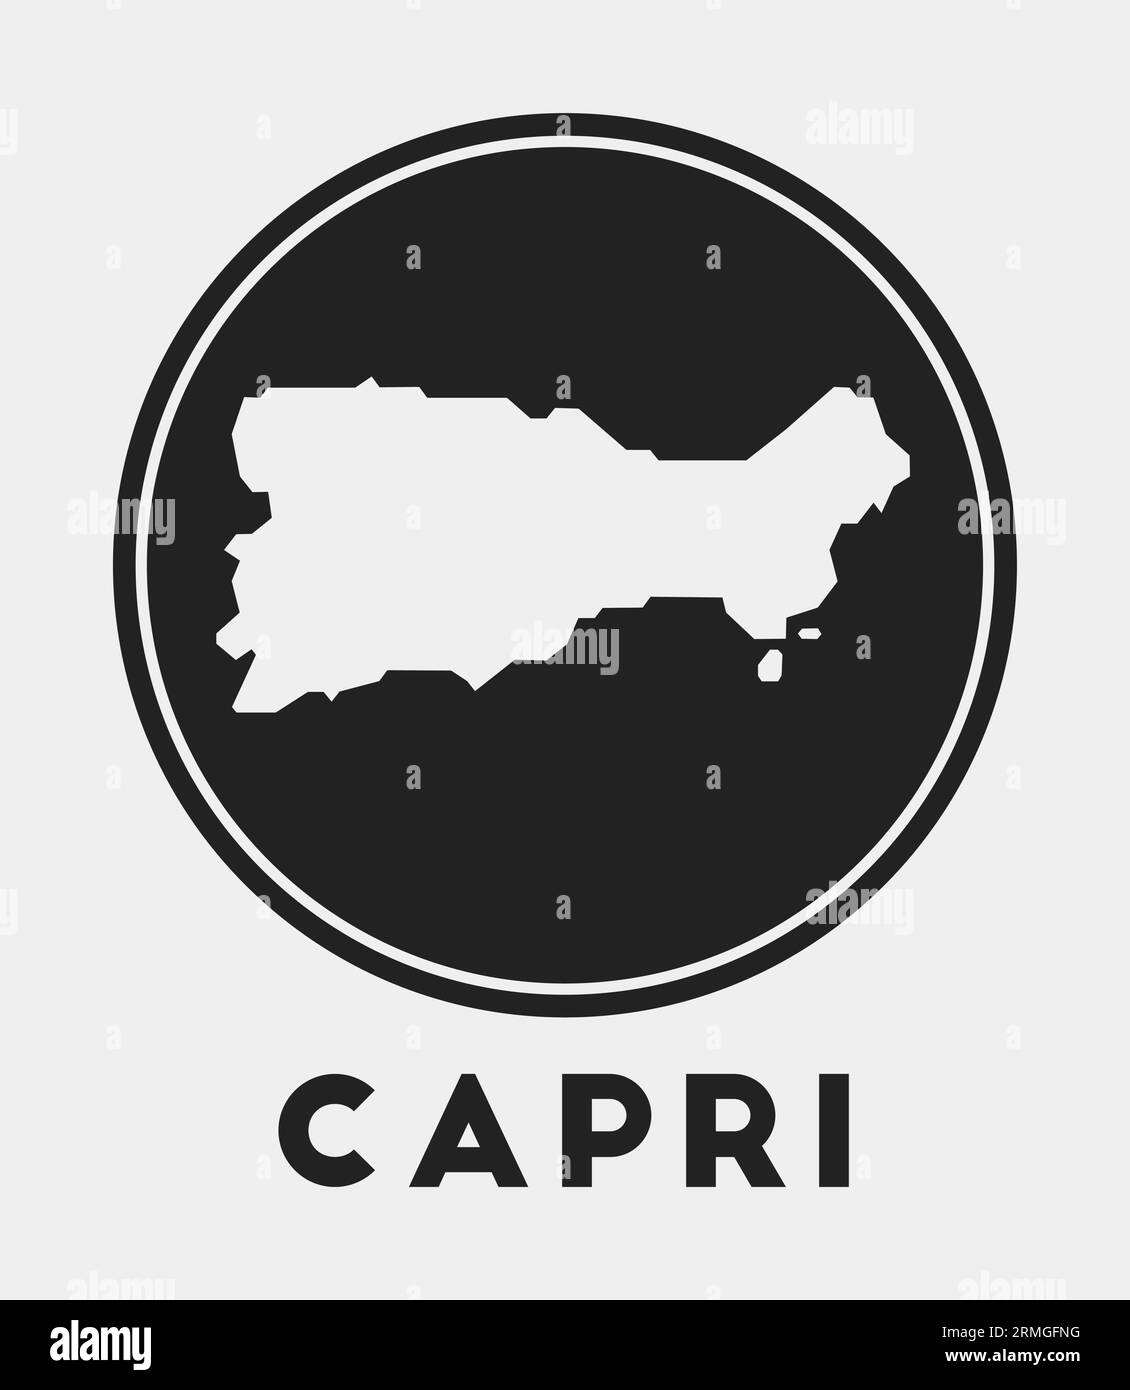 Capri icon. Round logo with island map and title. Stylish Capri badge with map. Vector illustration. Stock Vector